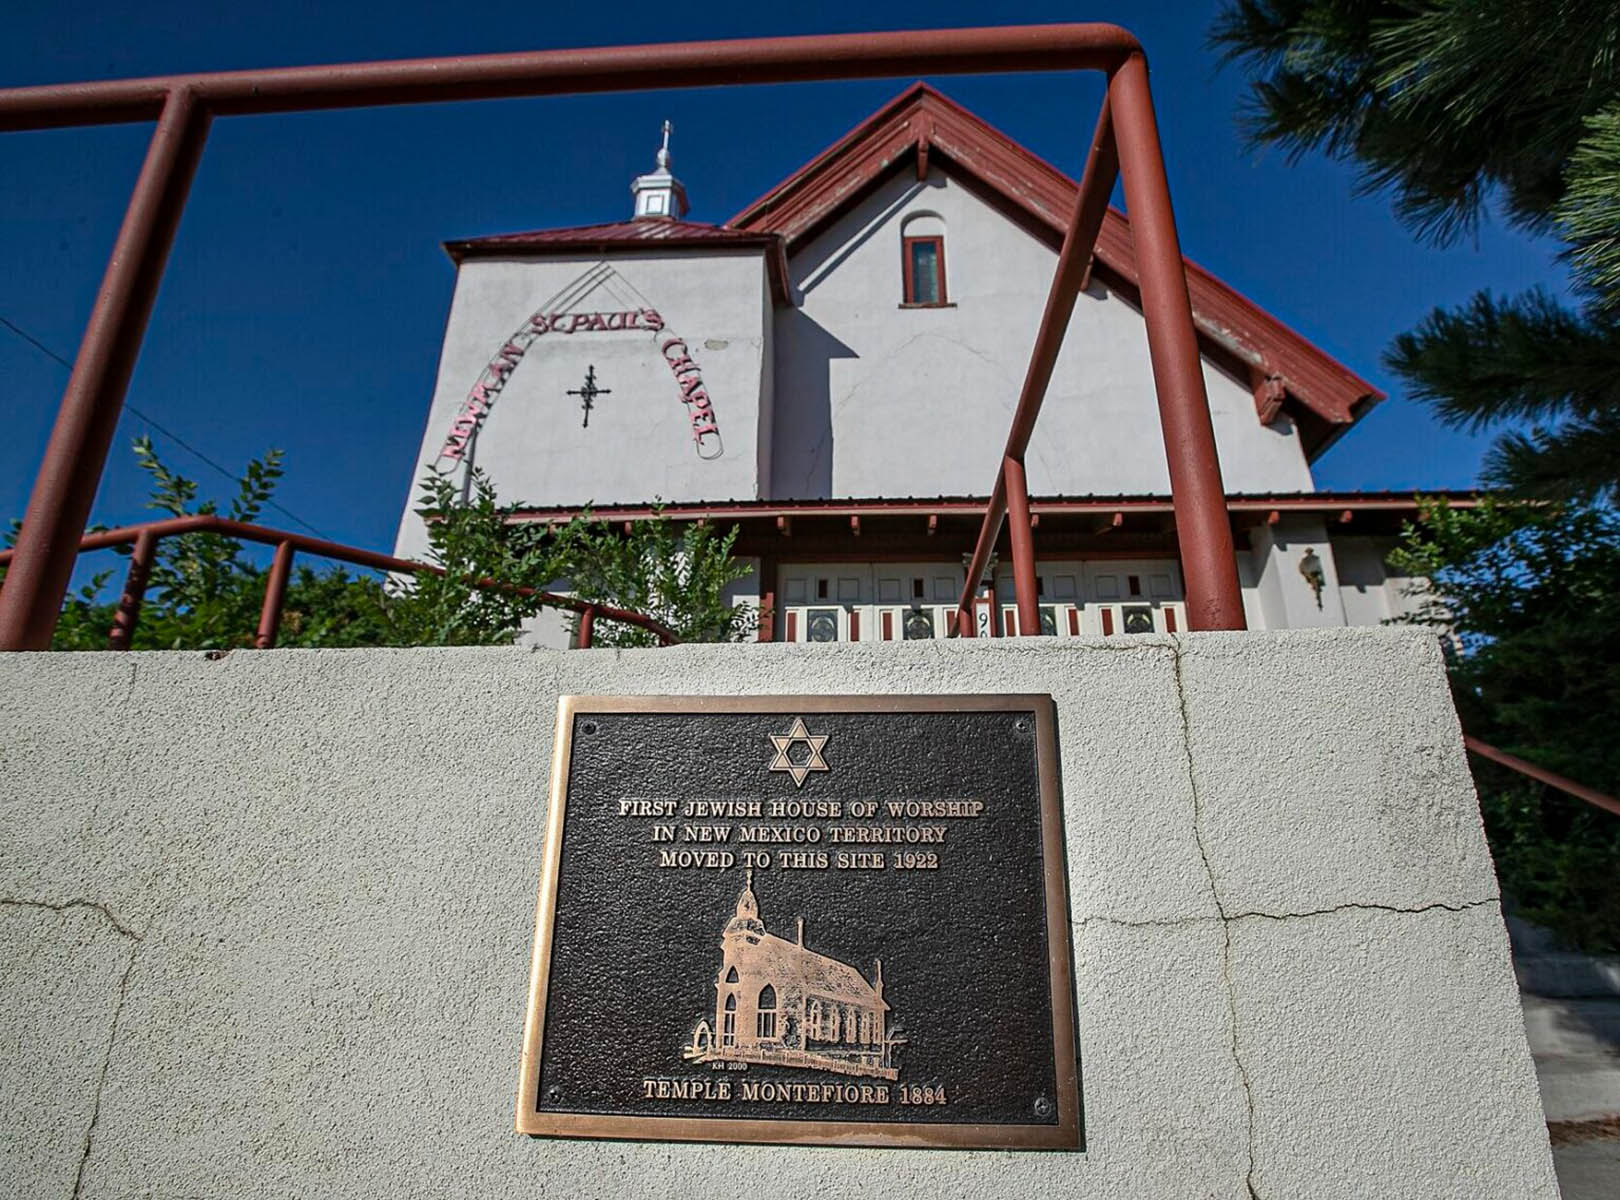 Temple Montefiore, the first synagogue in the New Mexico Territory, has been owned by the Catholic church for decades. (Jim Weber/The New Mexican)